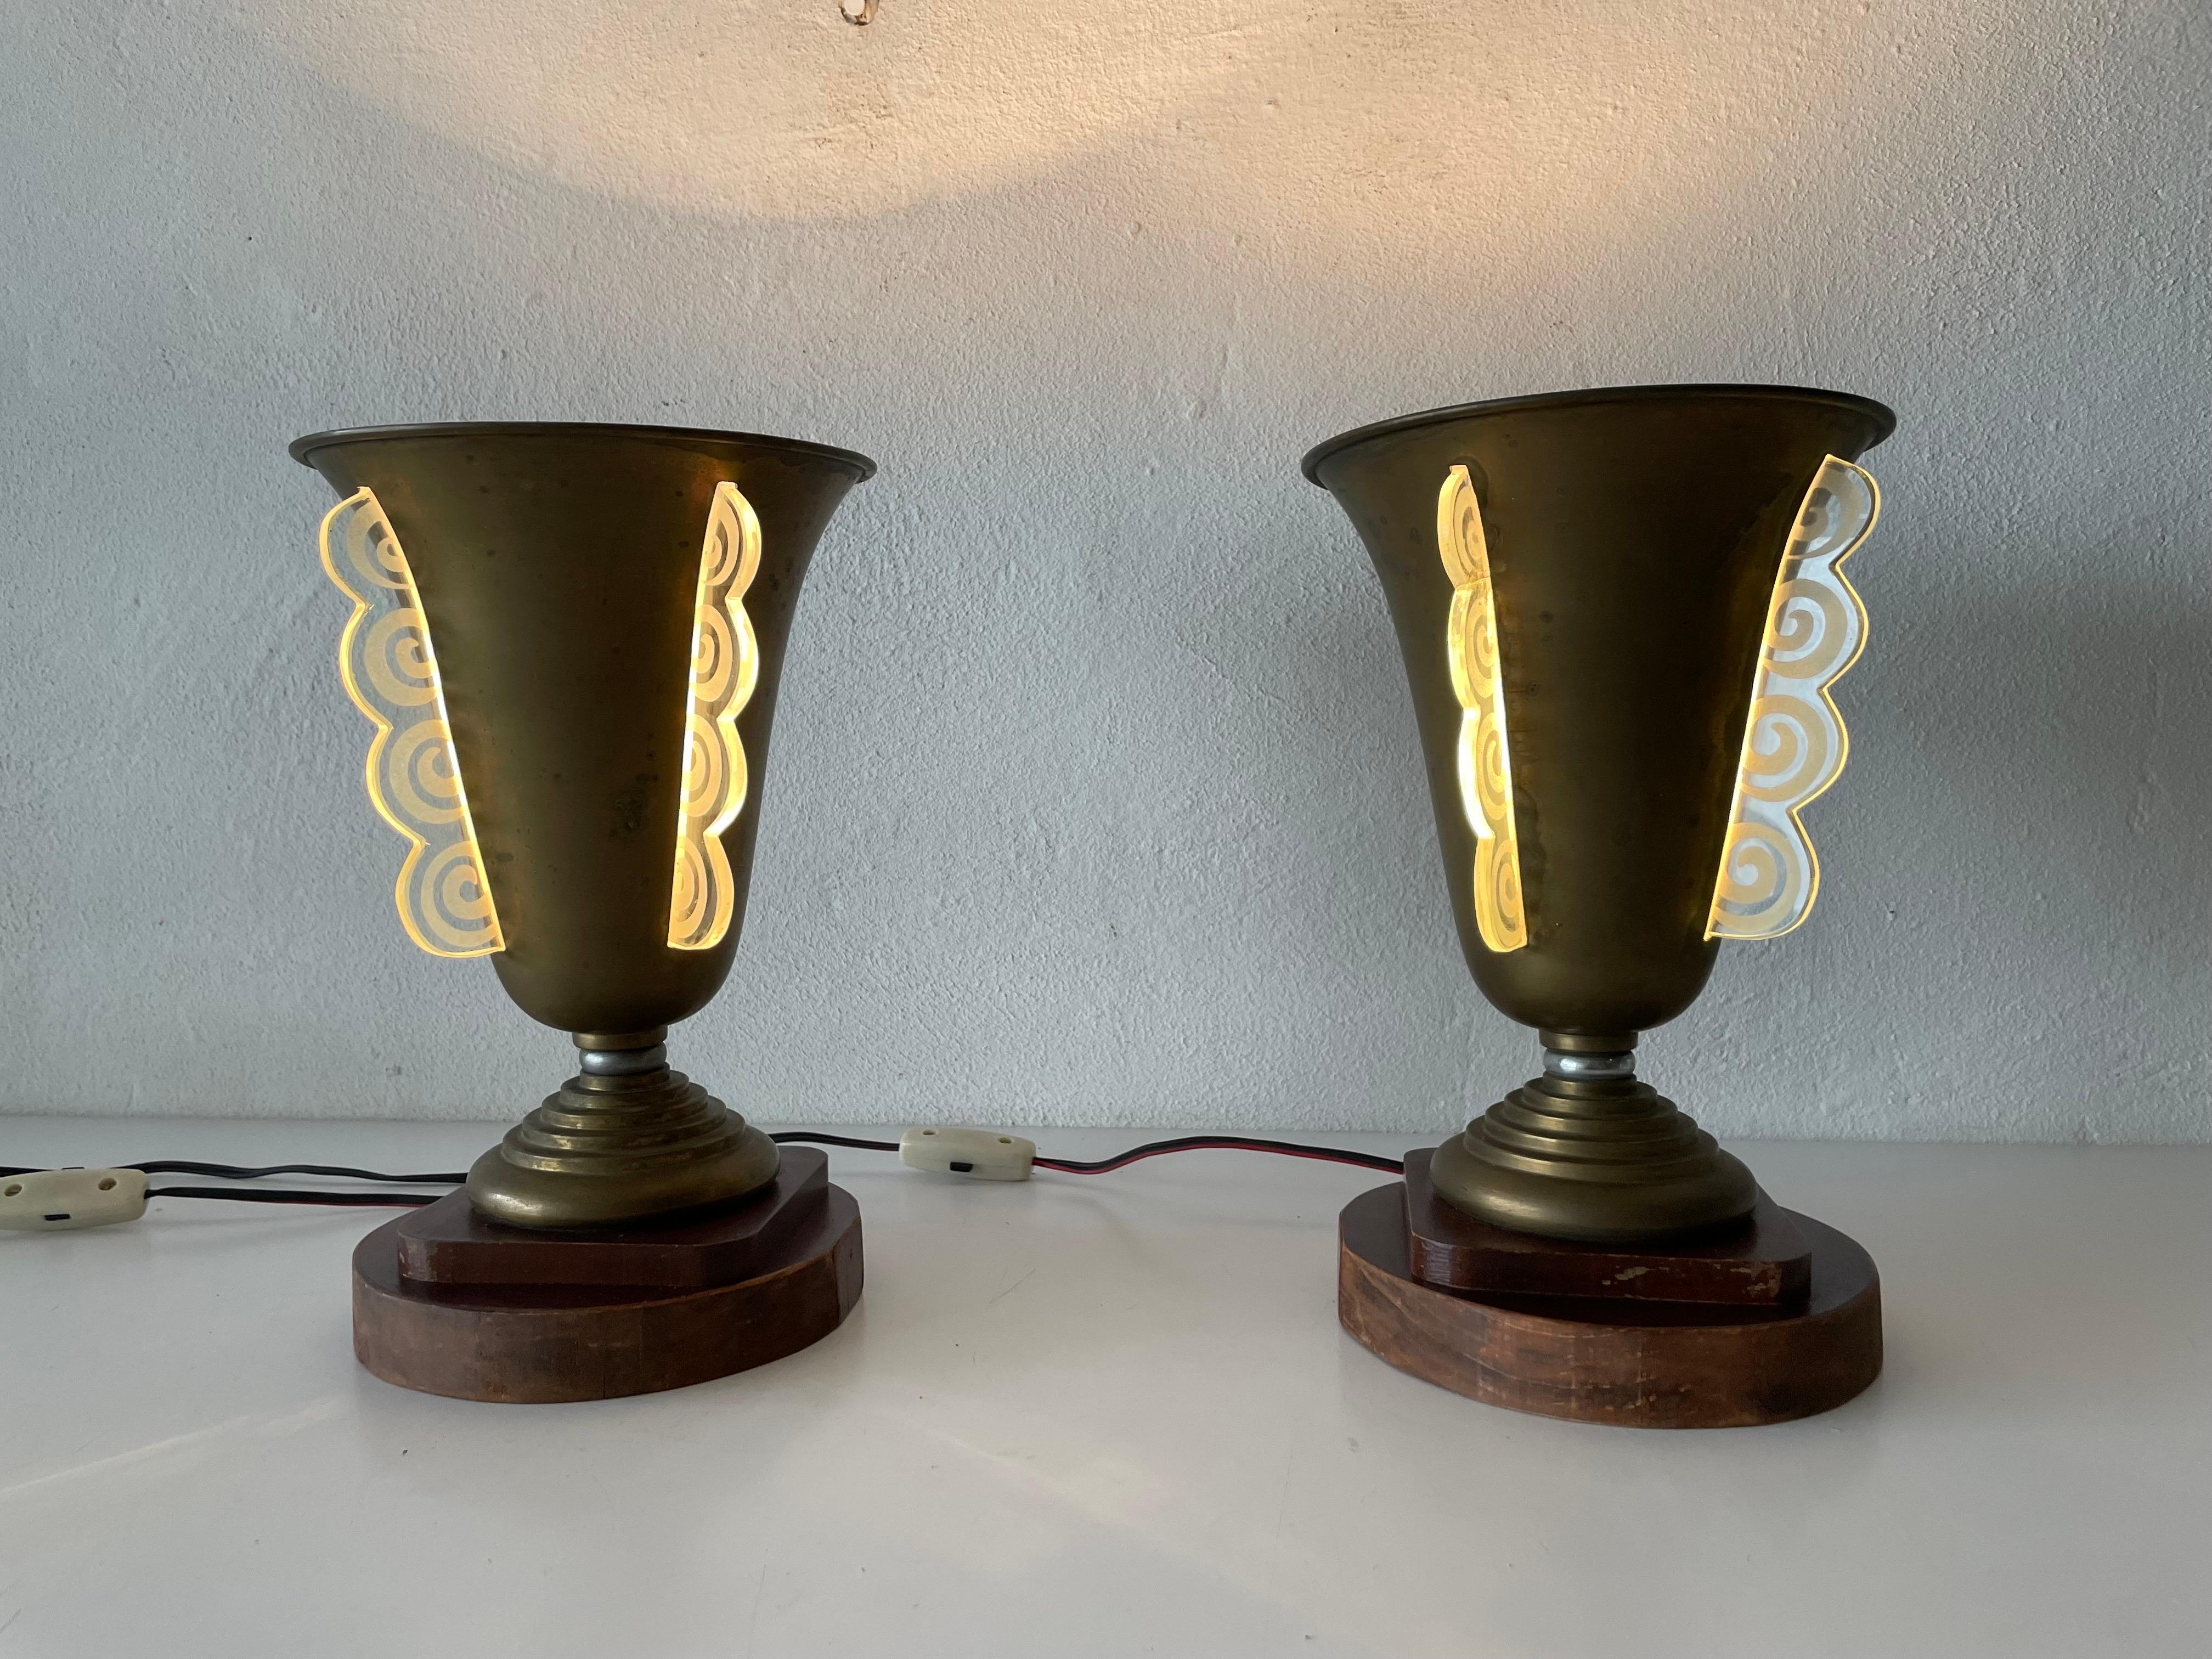 Art Deco Conic Design Pair of Table Lamps by Mazda, 1940s, France For Sale 6